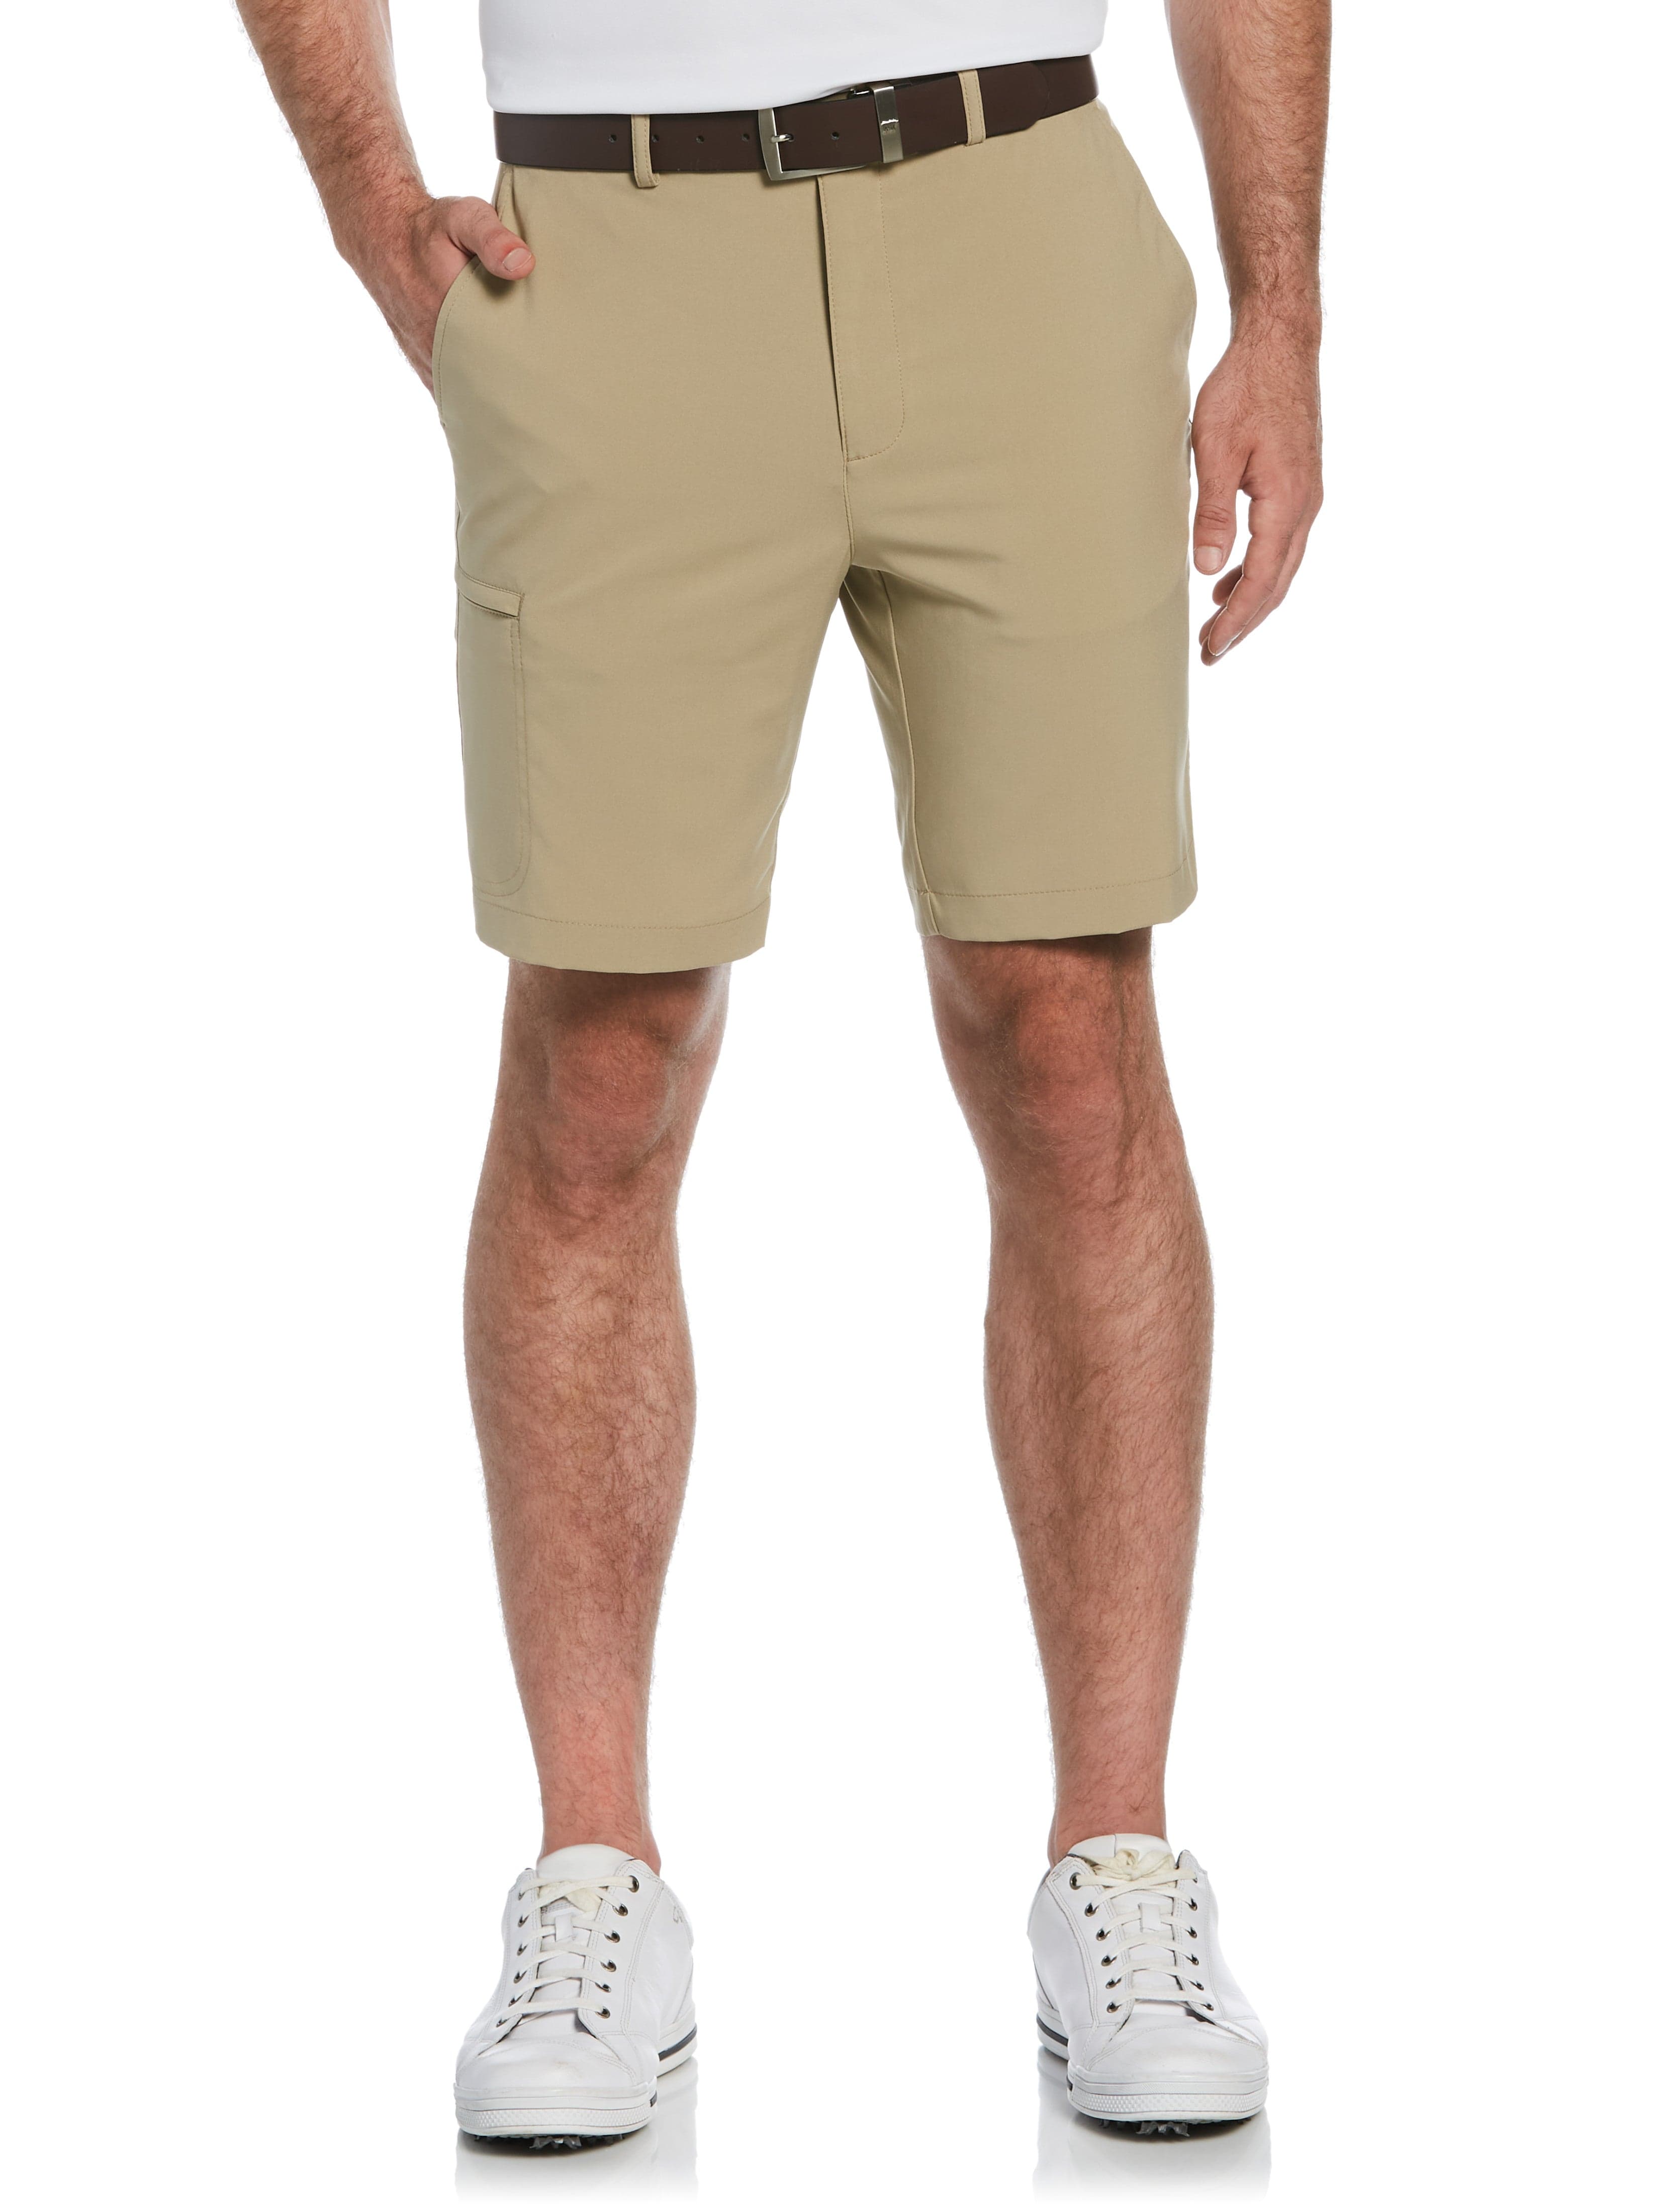 Jack Nicklaus Mens Flat Front Solid Golf Shorts w/ Cargo Pocket, Size 44, Chinchilla Beige, 100% Polyester | Golf Apparel Shop